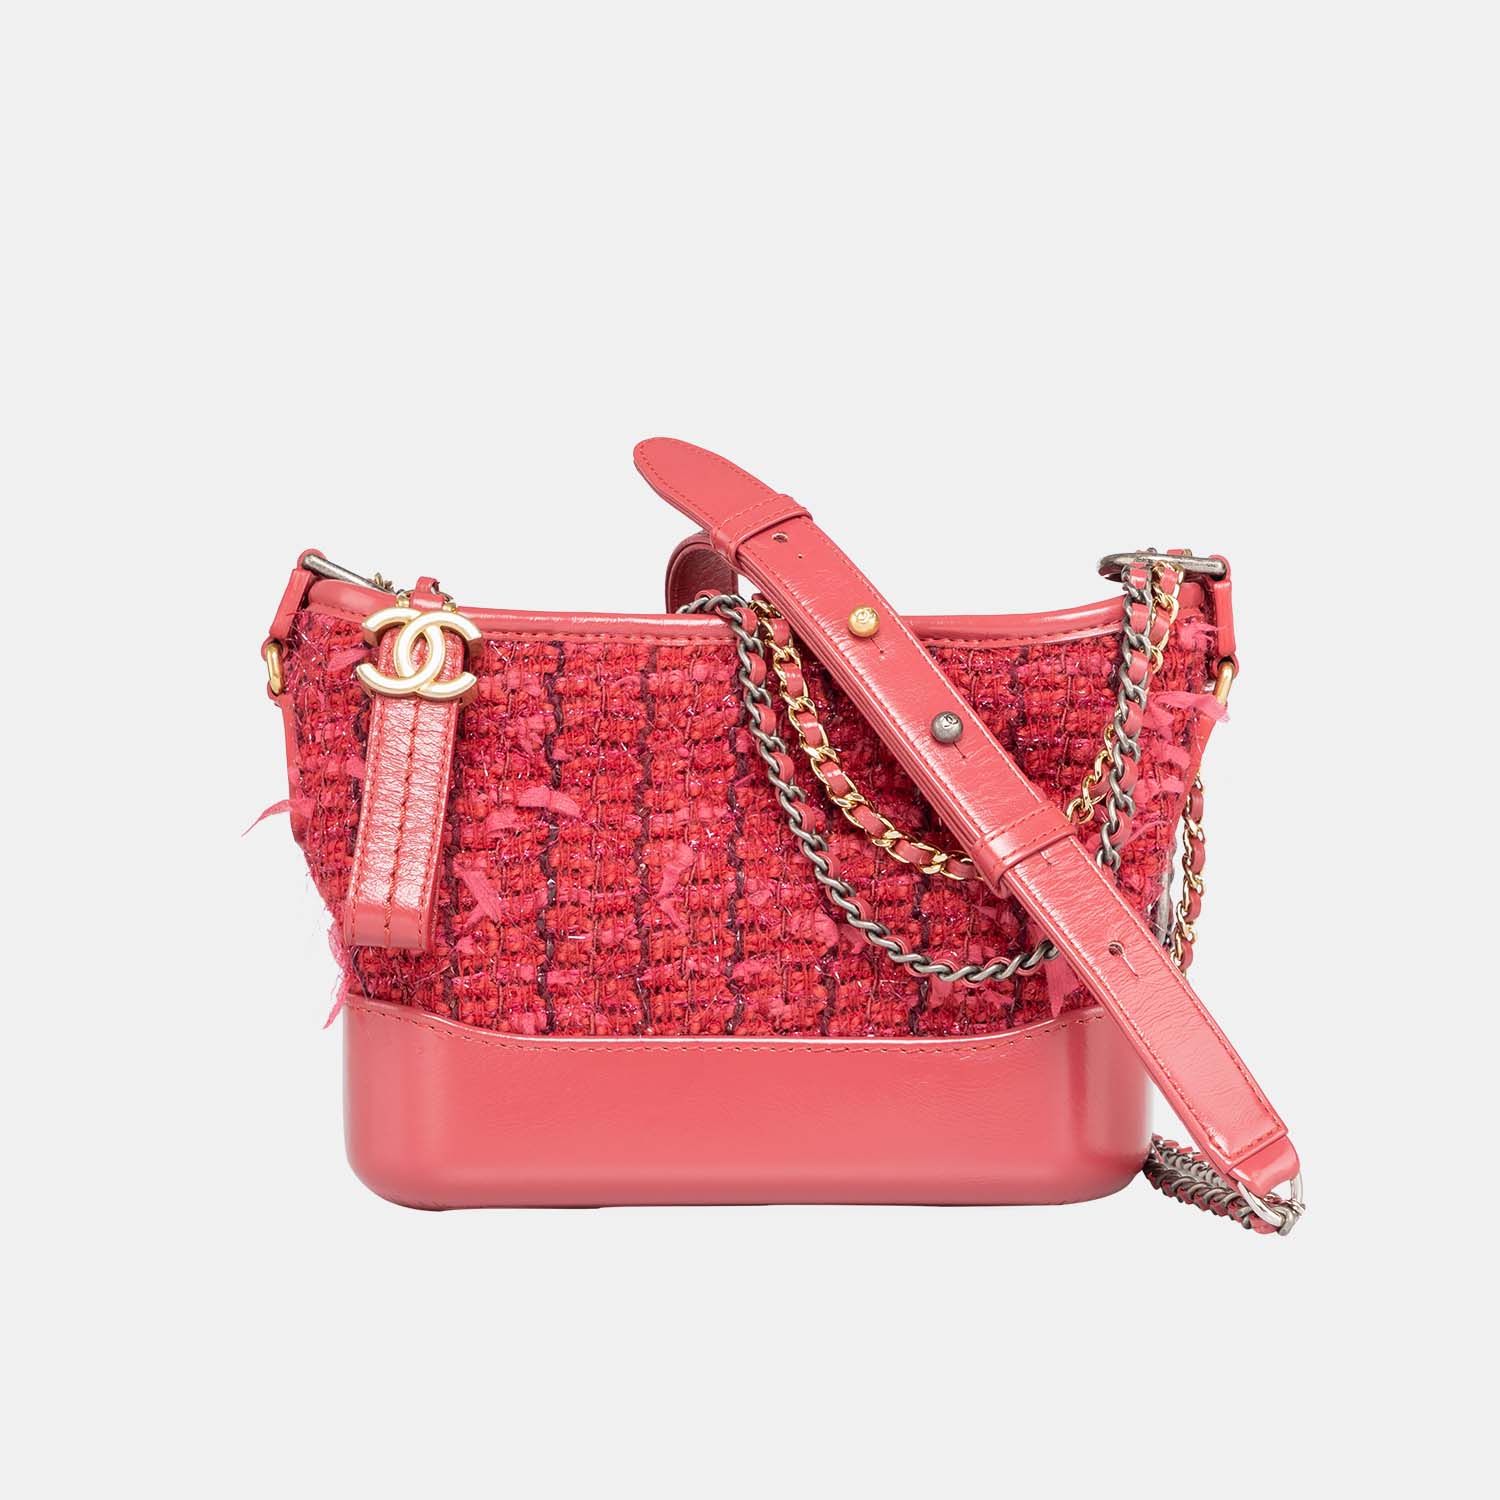 Chanel Pink Tweed and Leather Small Gabrielle Hobo Bag – Trésor